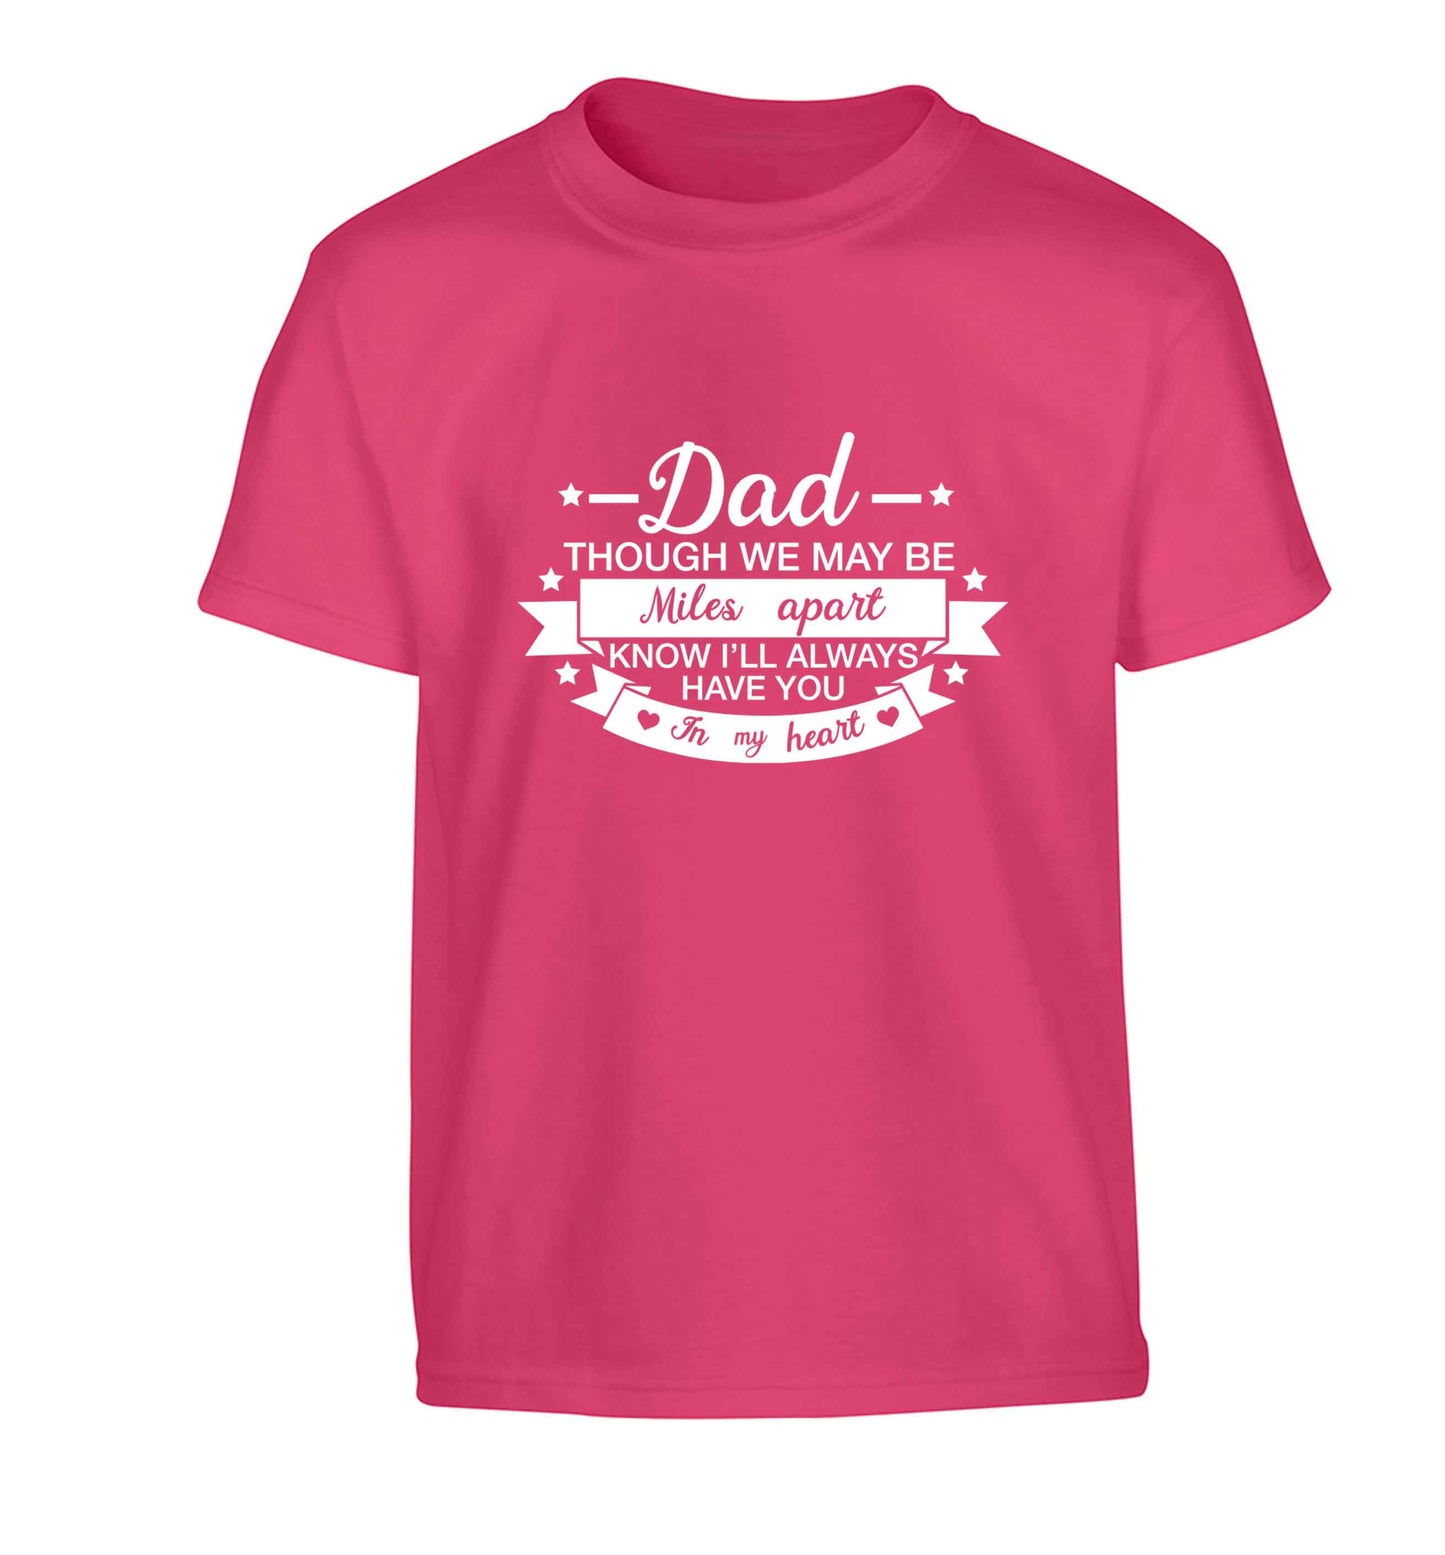 Dad though we are miles apart know I'll always have you in my heart Children's pink Tshirt 12-13 Years